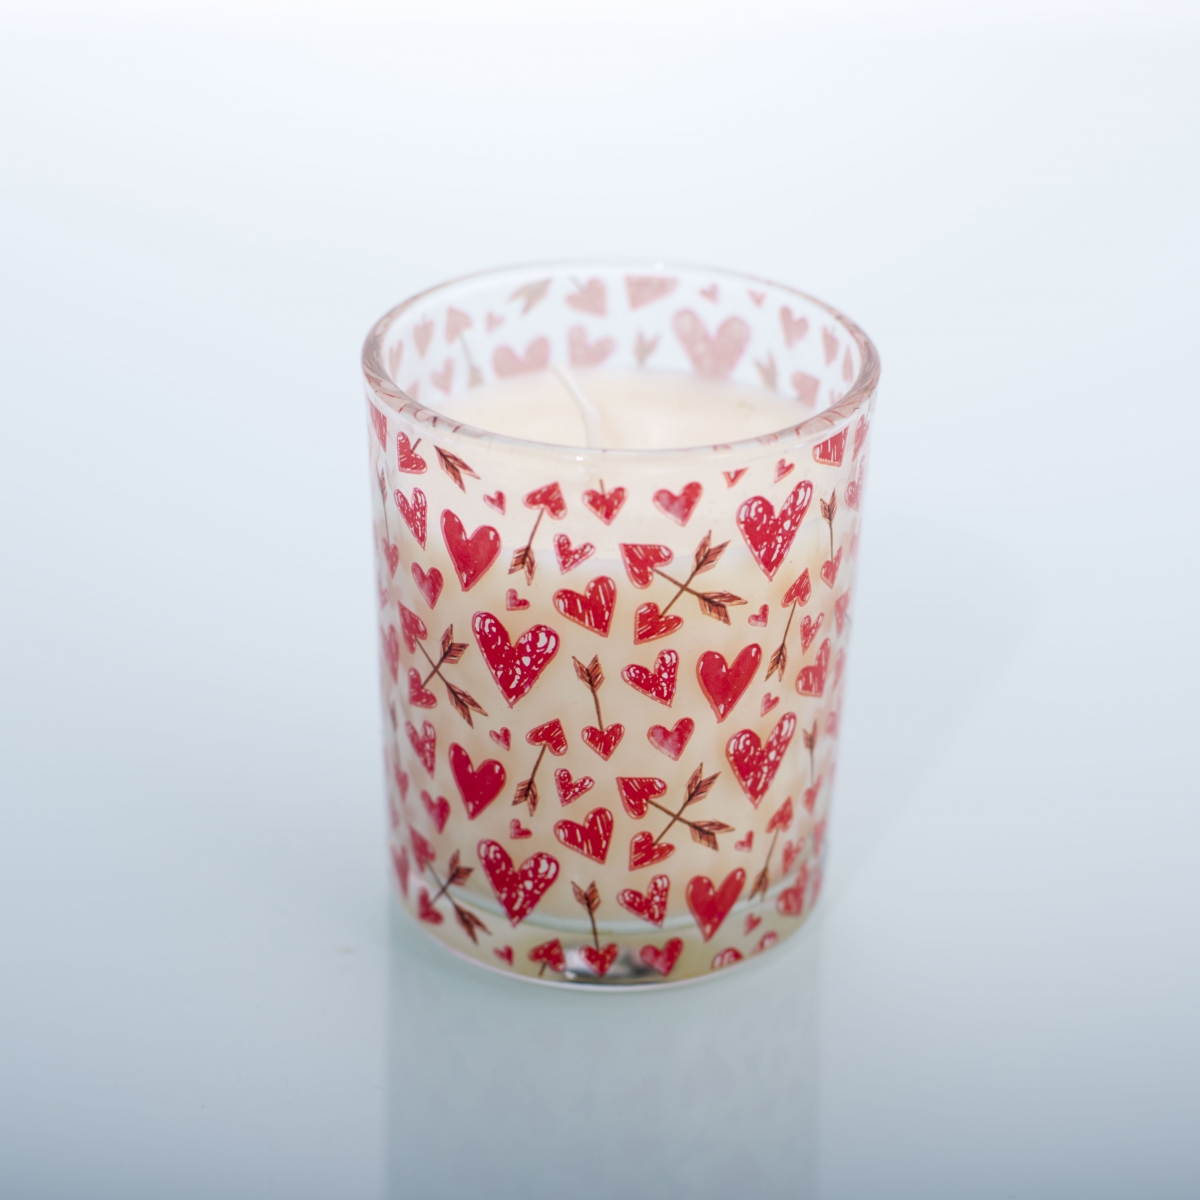 Scented Candles -Heart Decal ,Small Soy Candles ,Valentine Day Candles ,China Factory ,Price-HOWCANDLE-Candles,Scented Candles,Aromatherapy Candles,Soy Candles,Vegan Candles,Jar Candles,Pillar Candles,Candle Gift Sets,Essential Oils,Reed Diffuser,Candle Holder,